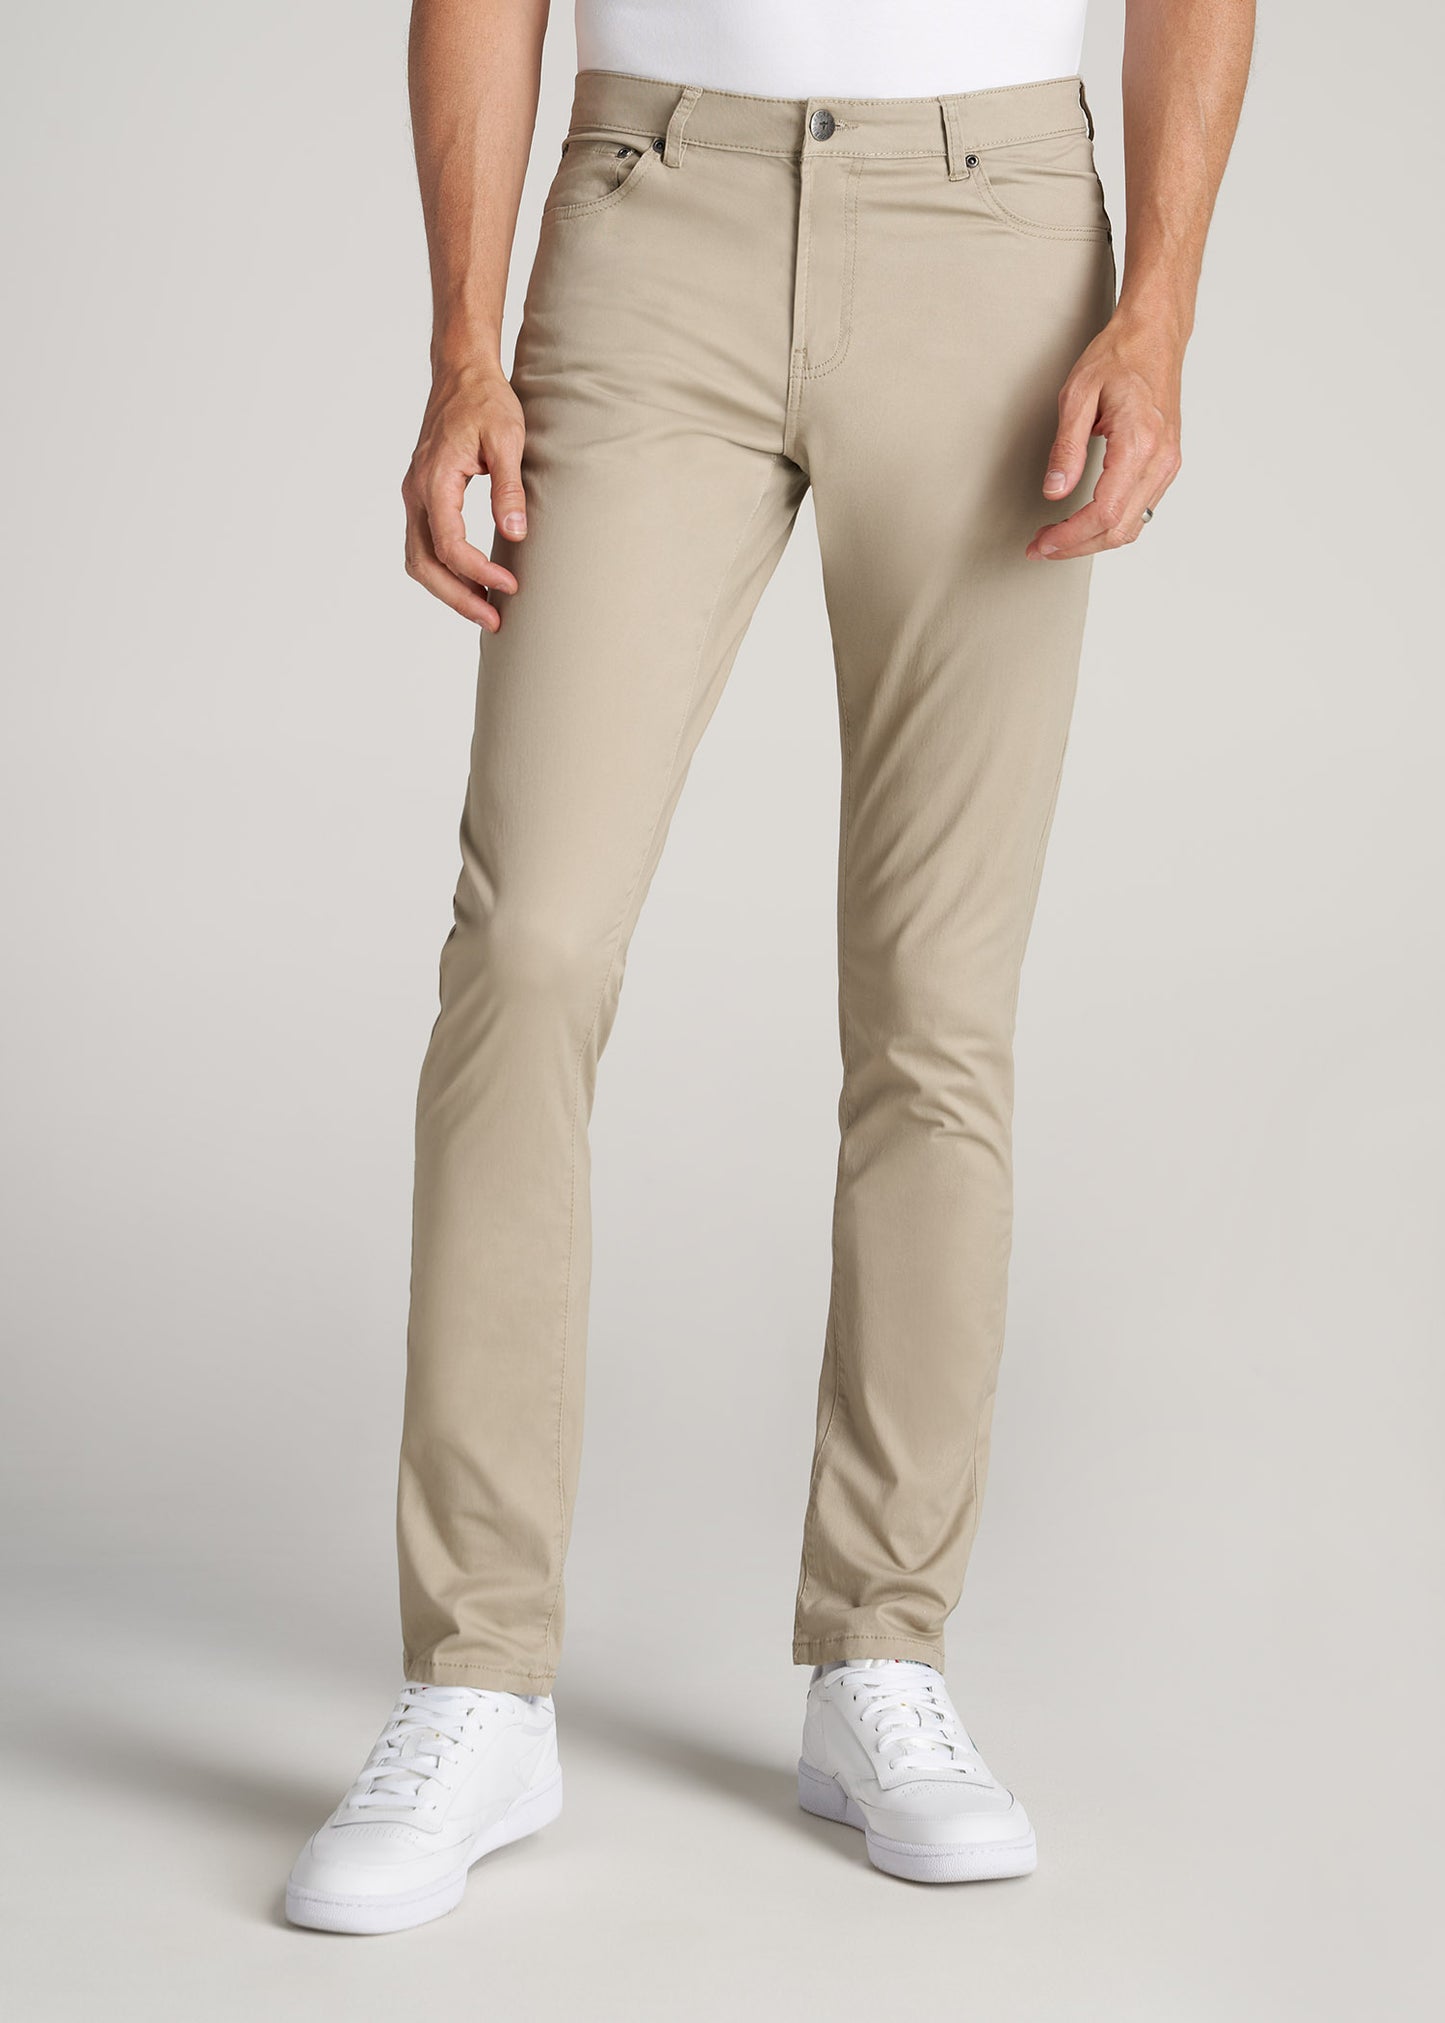 Carman TAPERED Fit Five Pocket Pants for Tall Men in Soft Beige